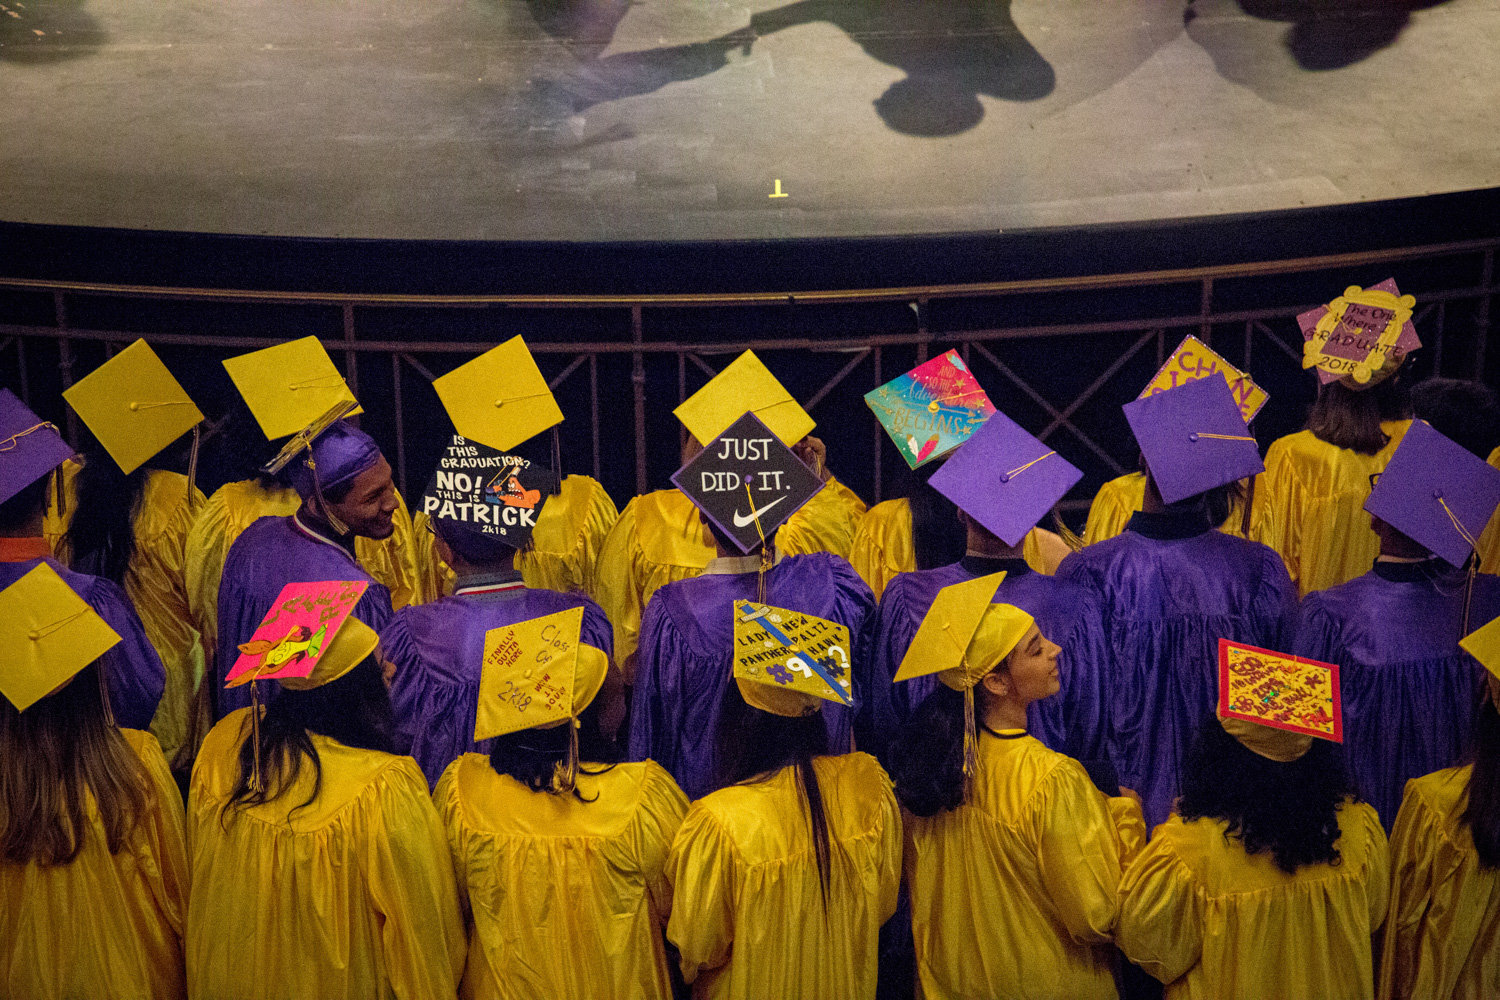 Graduating seniors won’t be able to enjoy the usual rites of passage, like IN-Tech’s 2018 graduation seen here, at least not right now. The city’s education board decided not to allow in-person graduations, though some schools, like the Bronx School of Law and Finance, have opted to slate their ceremonies for later in the year.